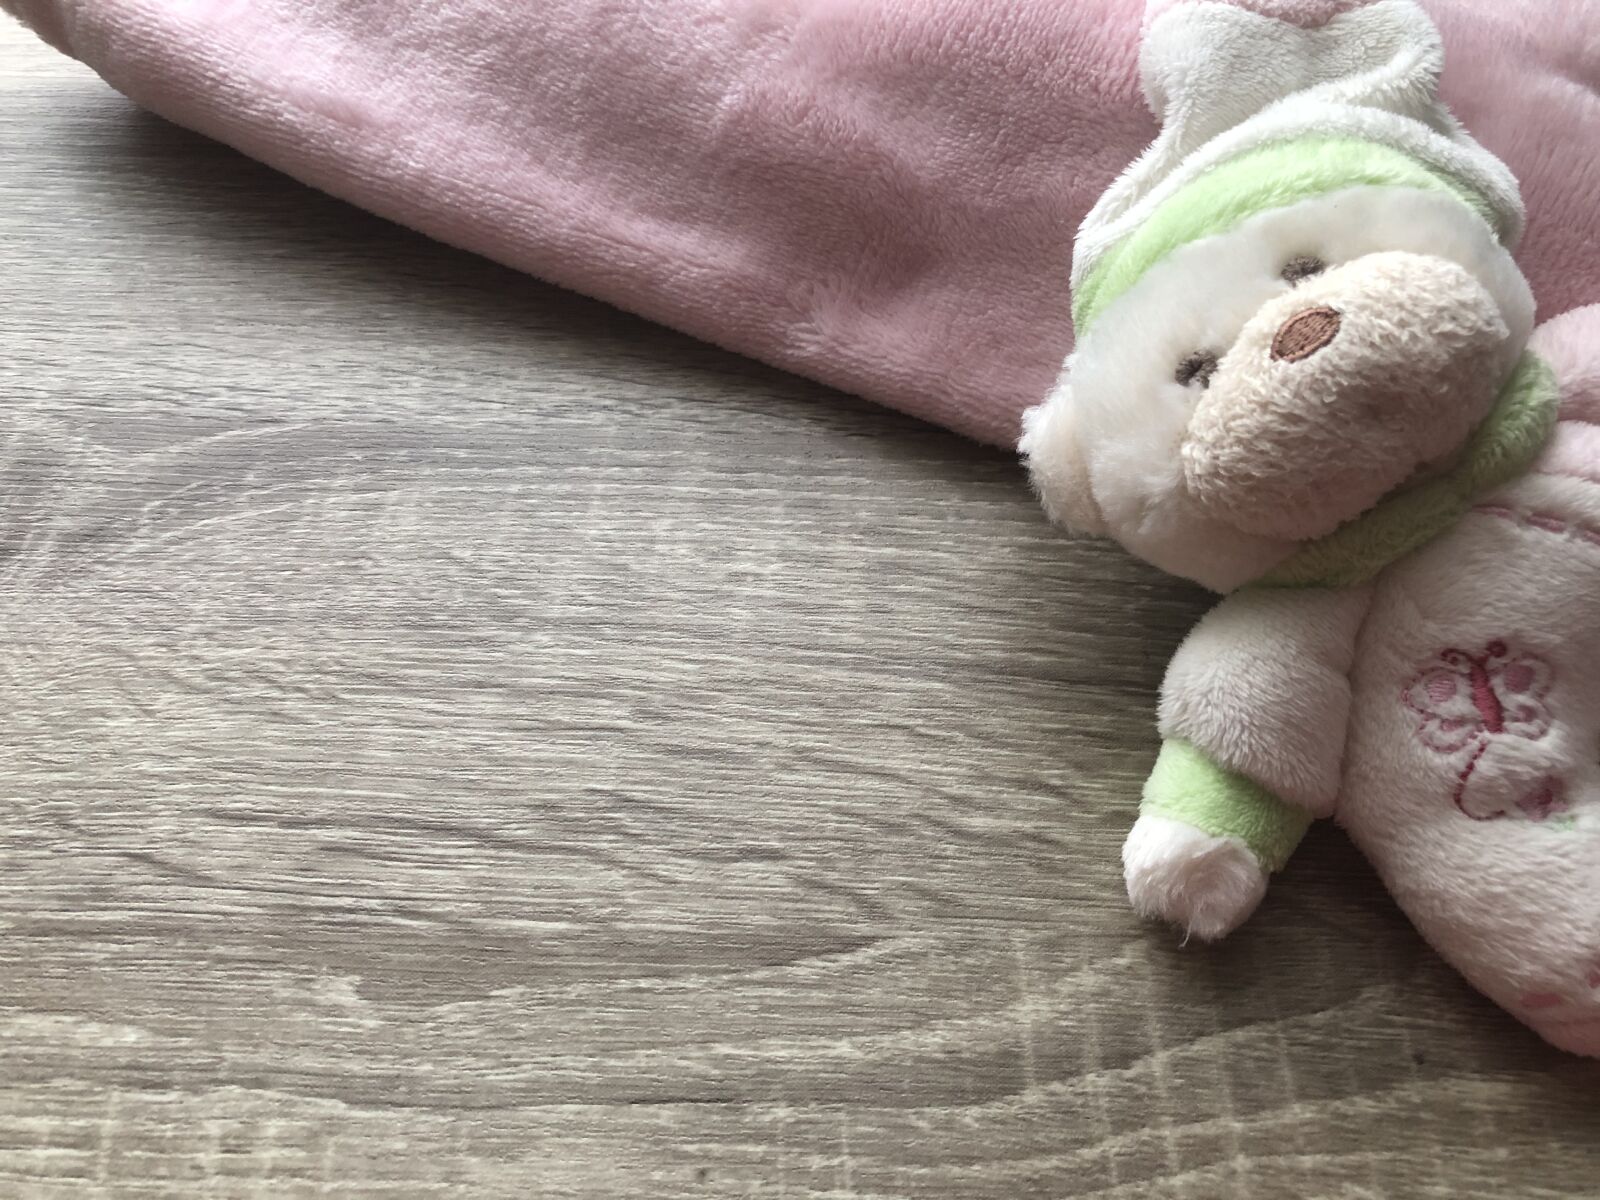 Apple iPhone 8 Plus sample photo. Teddy, toy, clothing photography